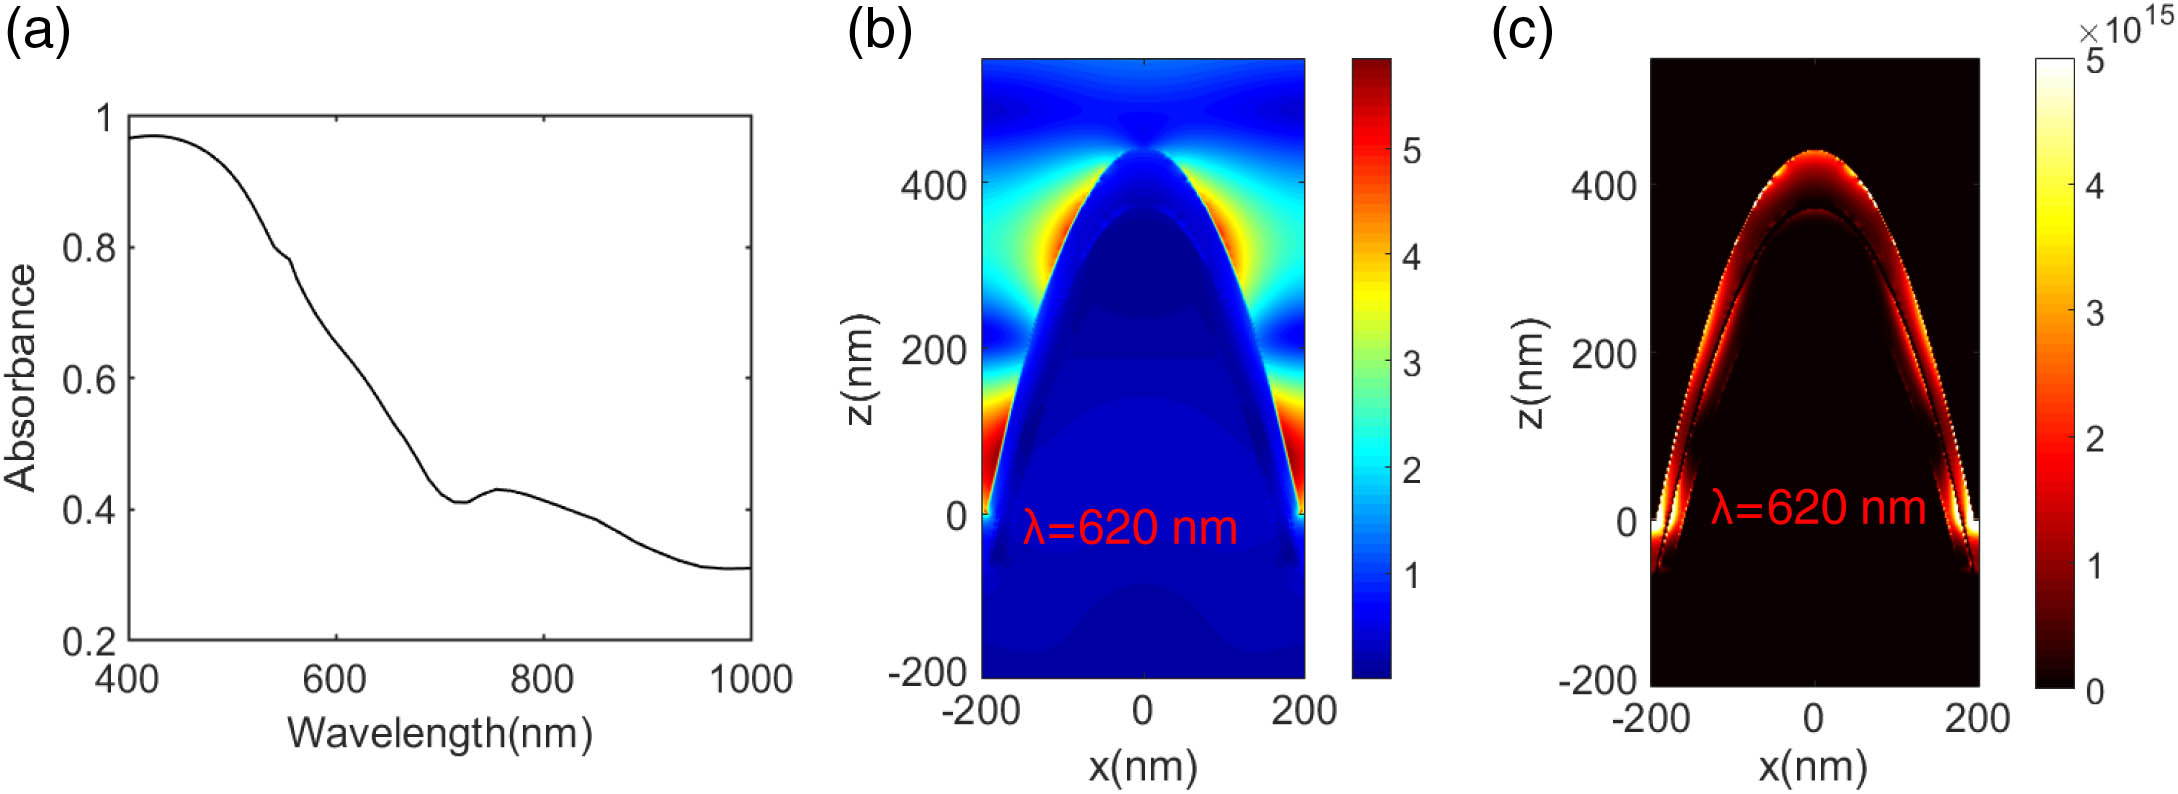 (a) Calculated absorbance spectrum in the 400–1000 nm range. (b) Simulated electric-field intensity distribution at the cross-section at the wavelength of 620 nm. (c) Distribution of dissipative energy density at the wavelength of 620 nm, showing strong absorption along the sidewall.